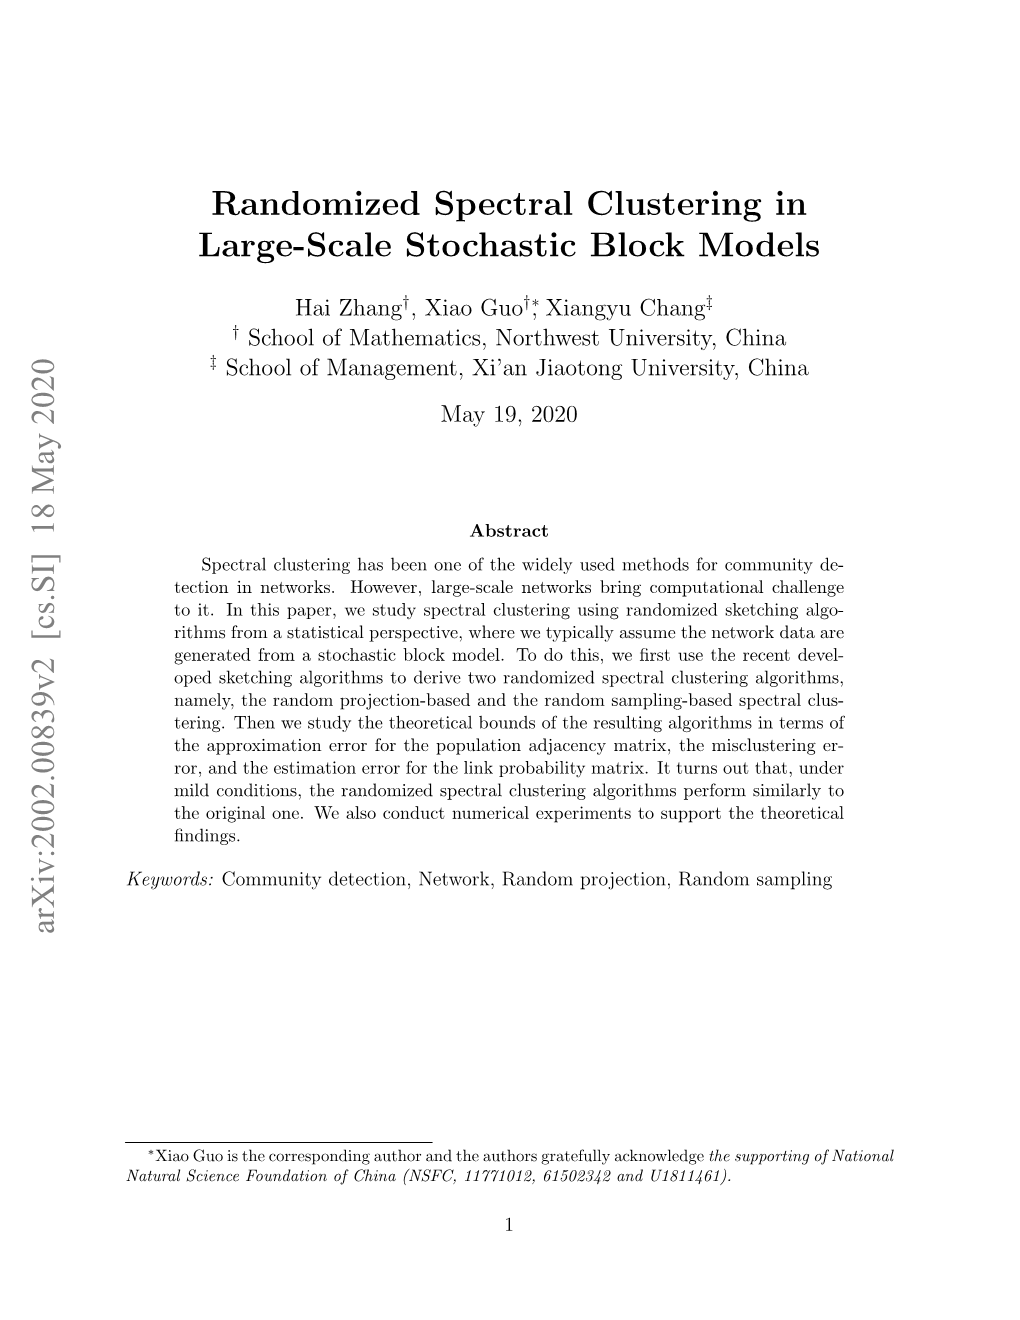 Randomized Spectral Clustering in Large-Scale Stochastic Block Models